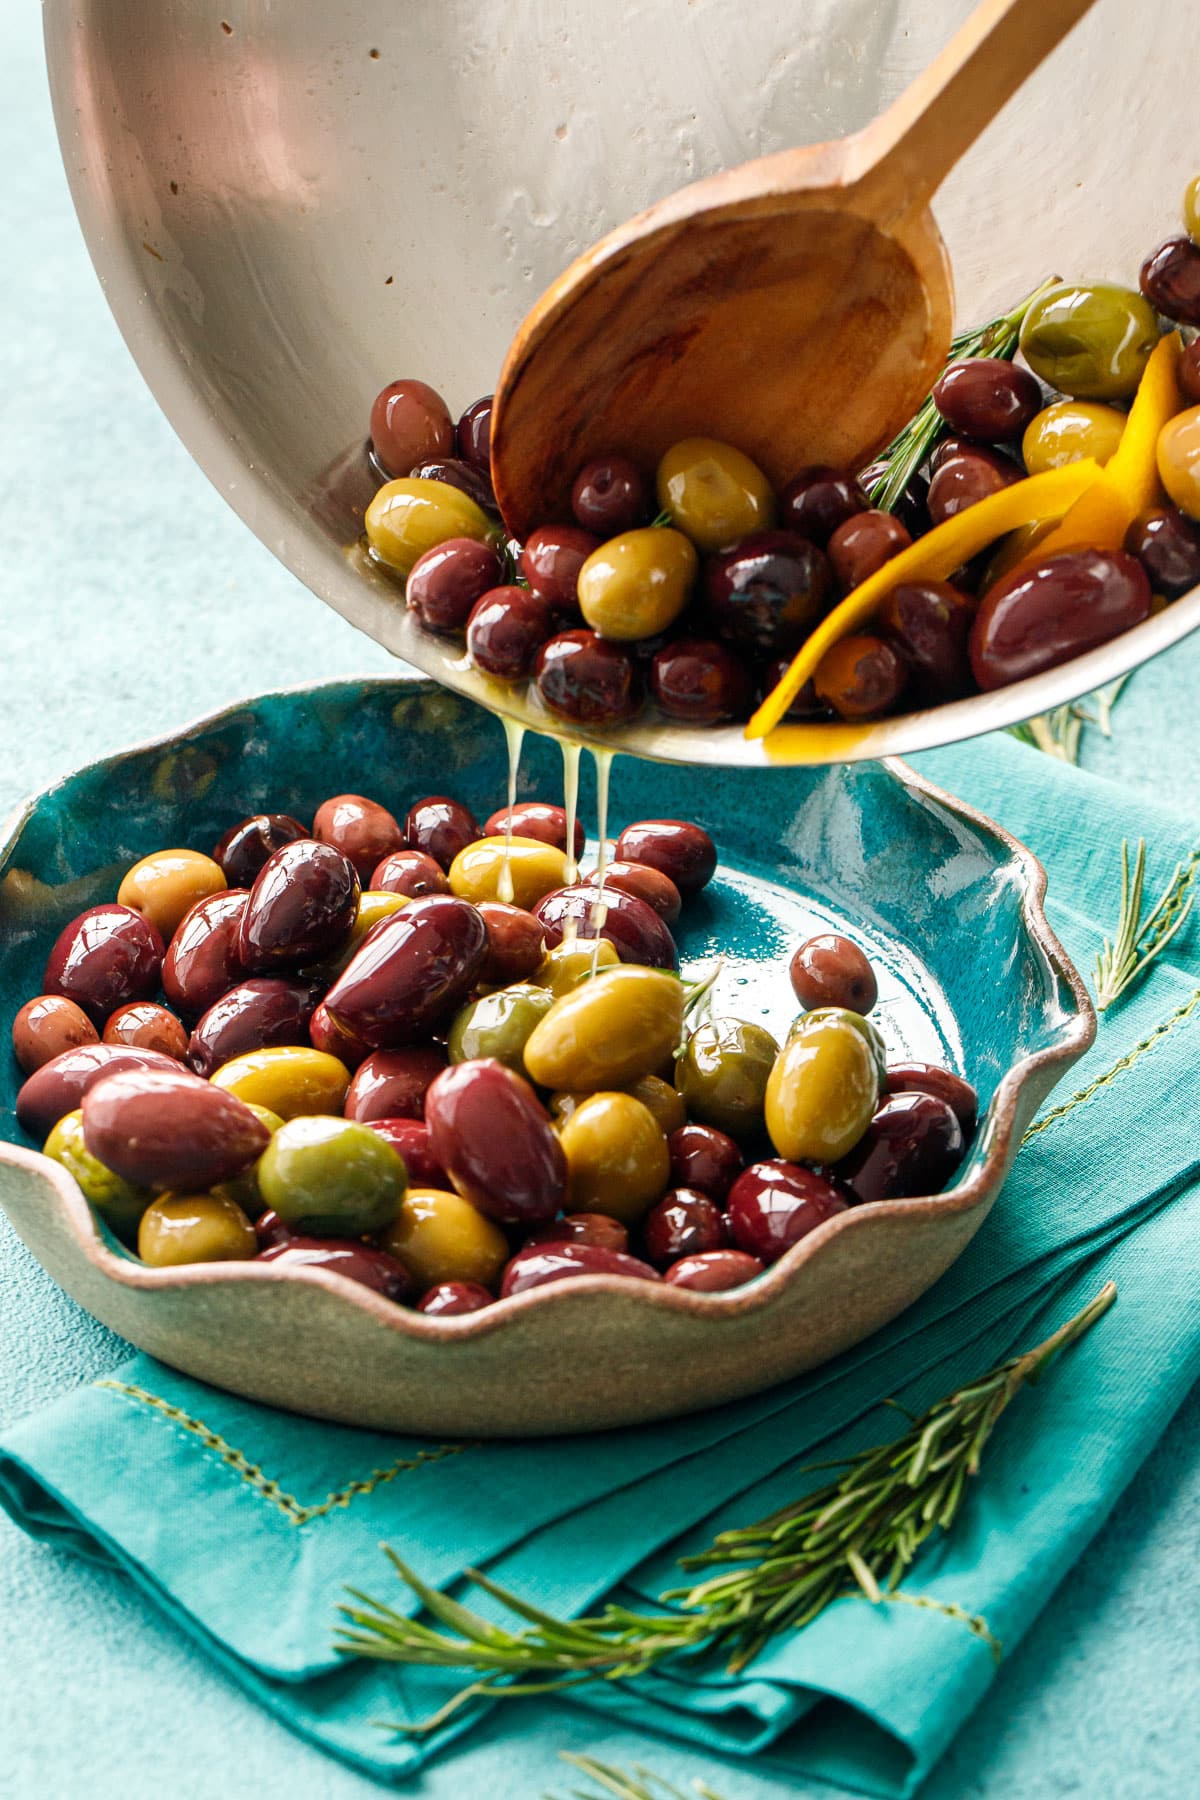 Pouring warm sautéed olives from stainless skillet into a ruffled-edge turquoise ceramic bowl with visible drips of oil.